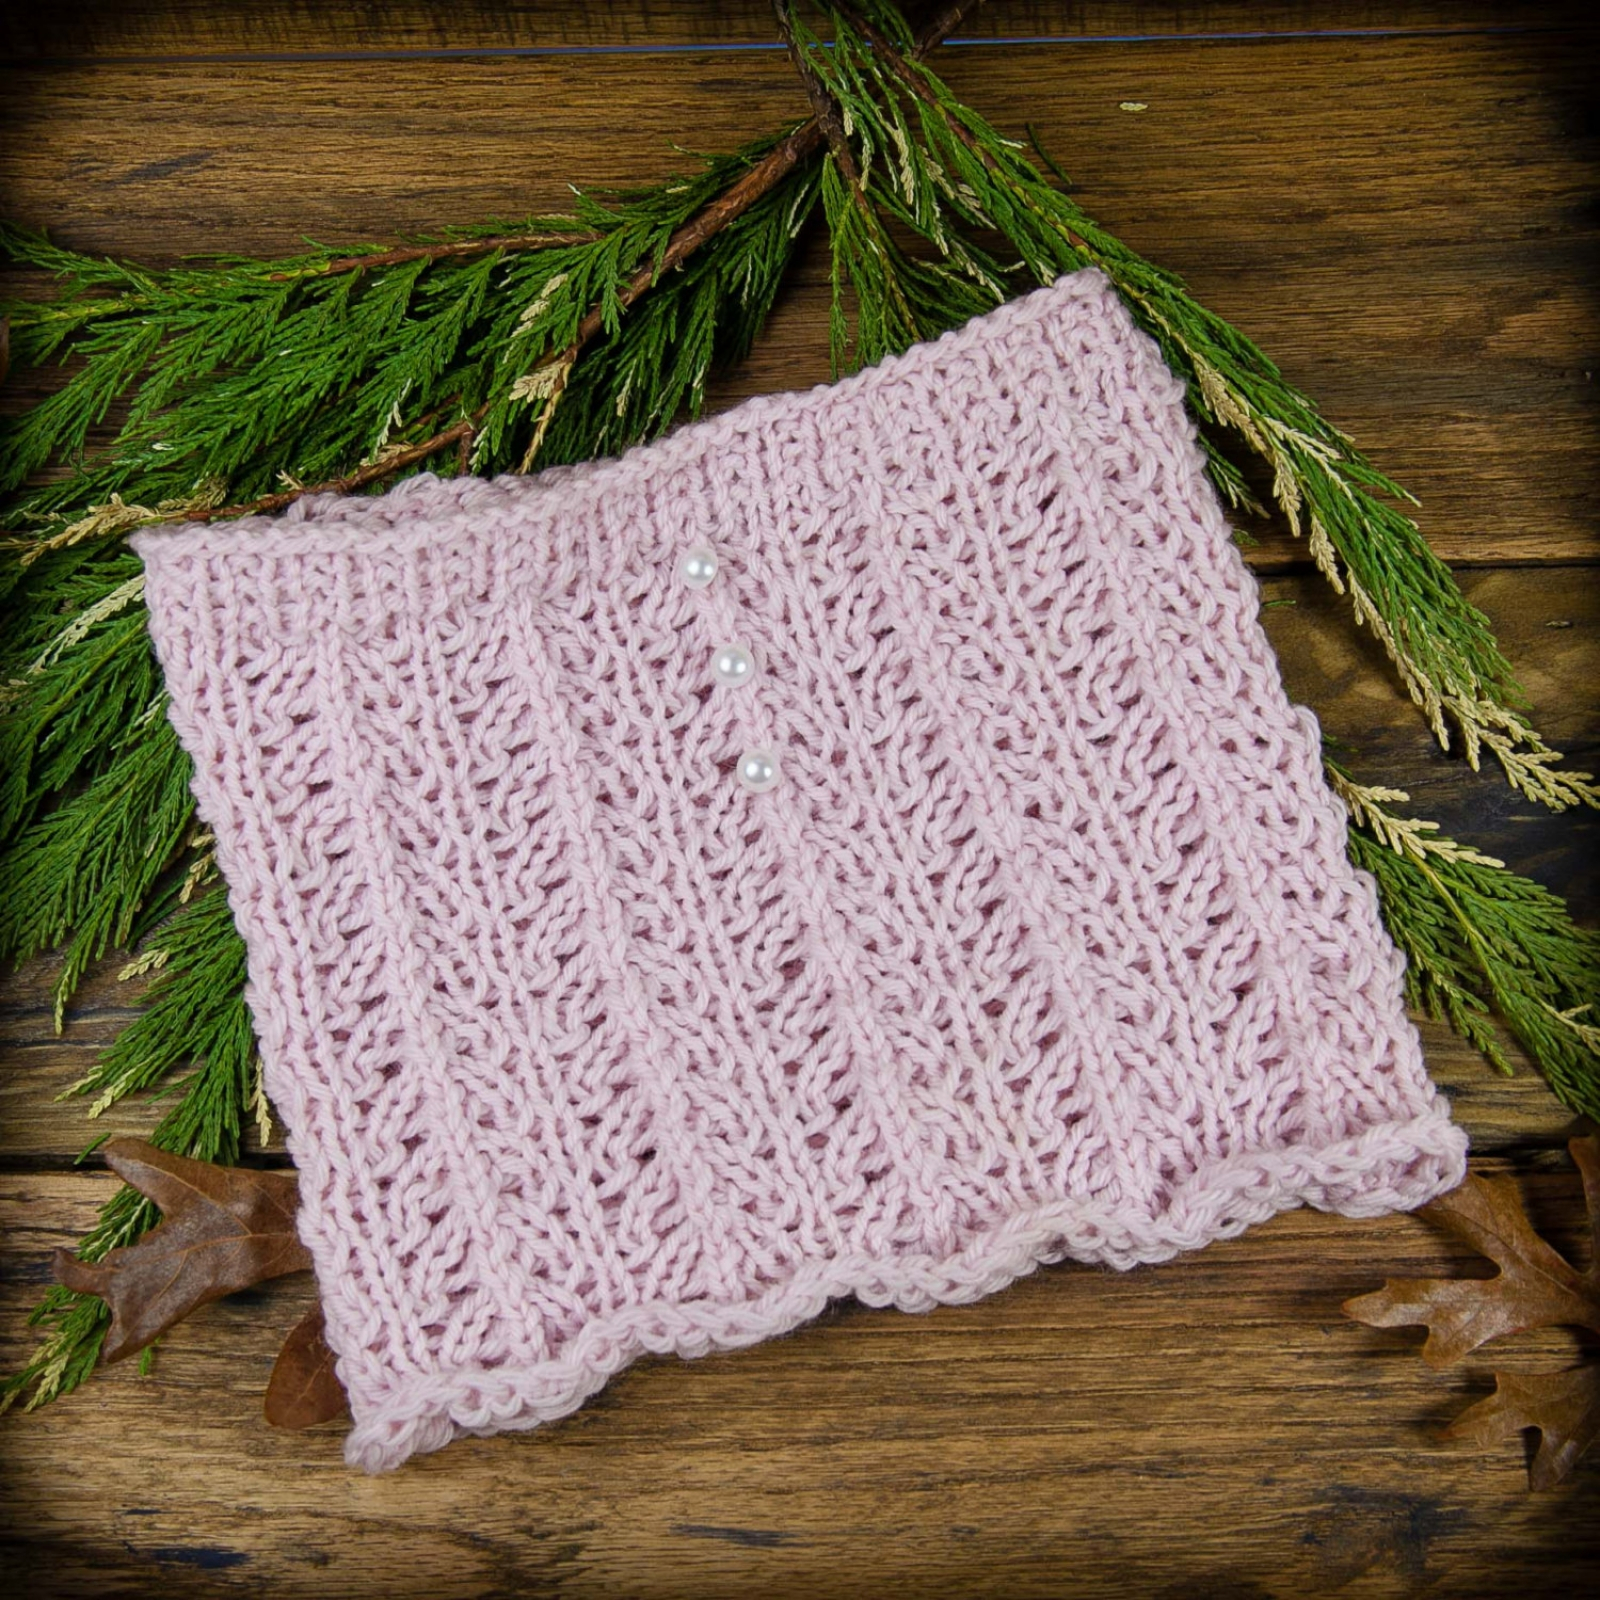 Knit Lace Cowl Pattern Loom Knit Lace Cowl Neckwarmer Pattern Perfect For A Little Girl Or A Woman Who Loves Delicate Things Very Feminine